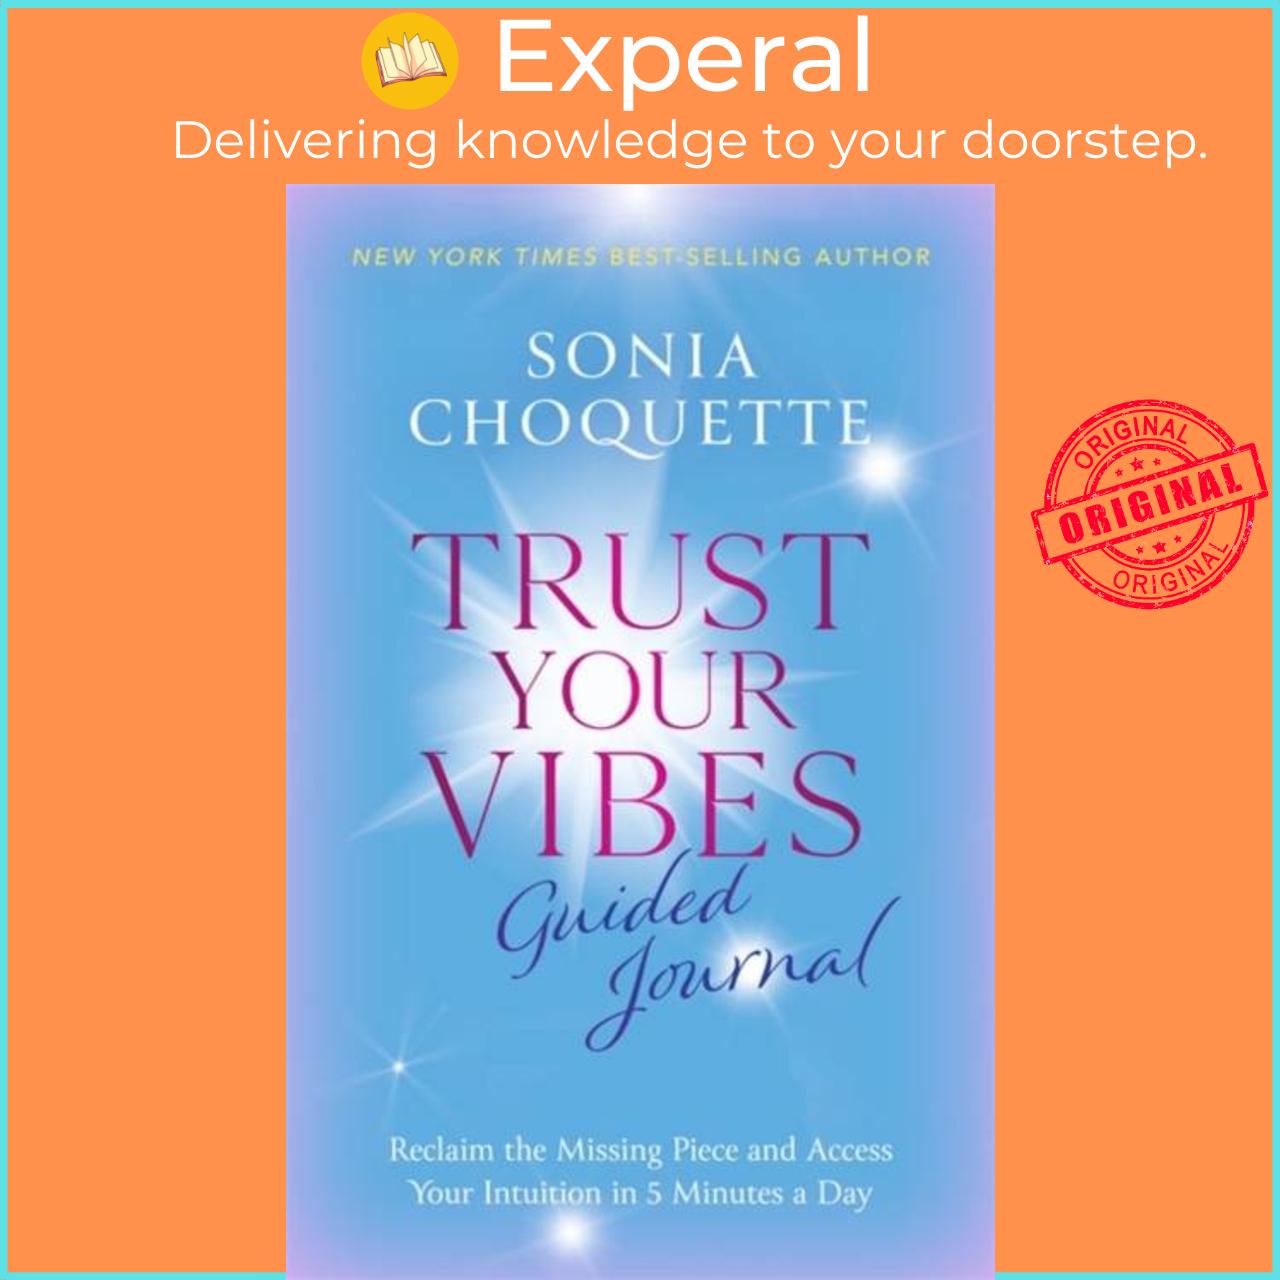 Sách - Trust Your Vibes Guided Journal - Reclaim the Missing Piece and Access by Sonia Choquette (UK edition, paperback)